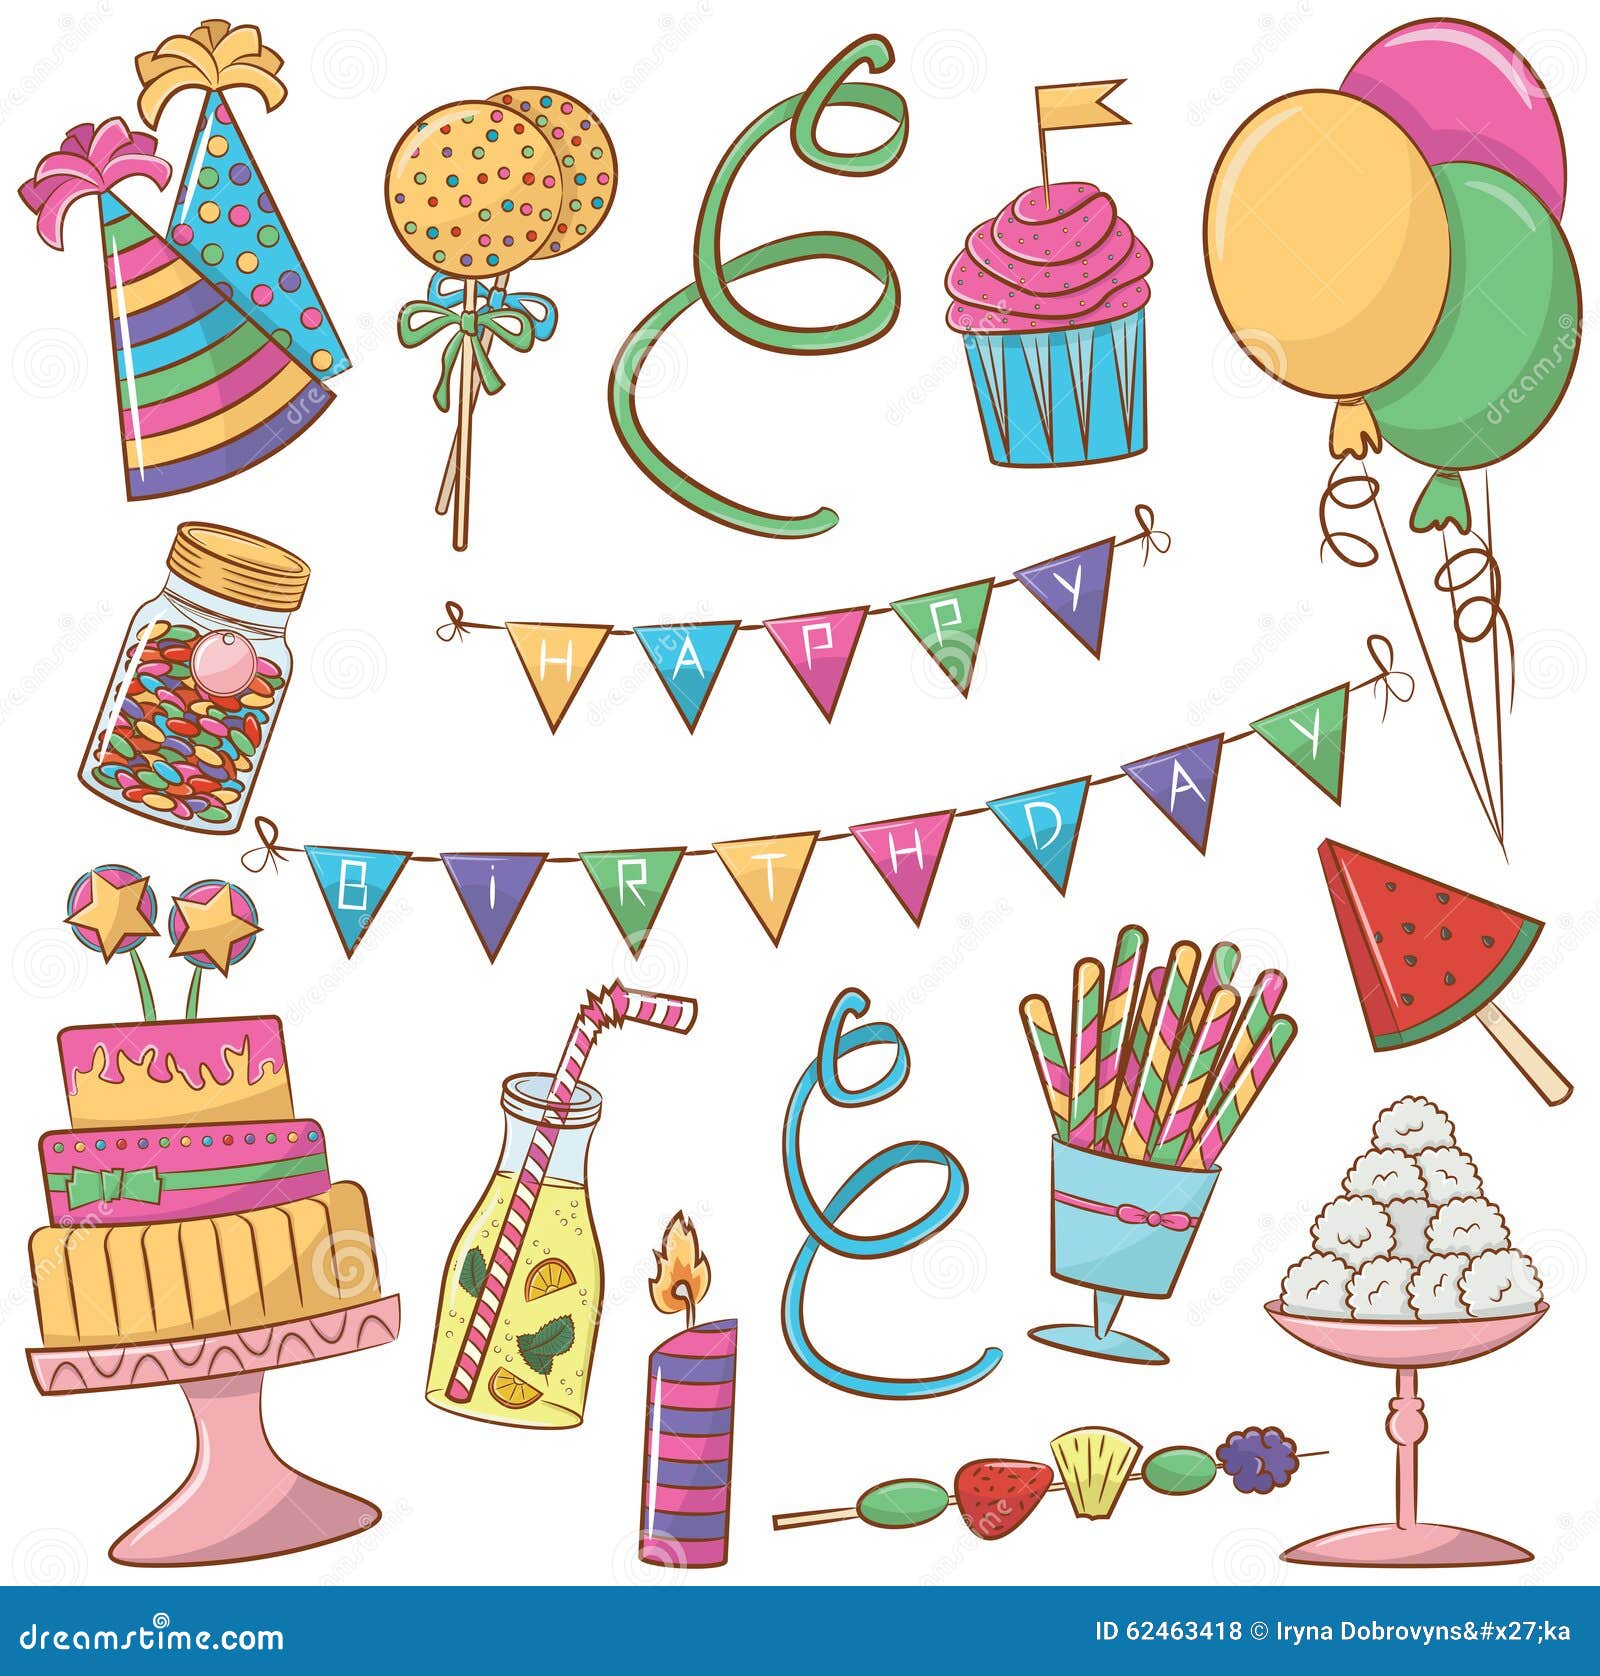 Download Birthday Icons stock vector. Illustration of cute, cake - 62463418